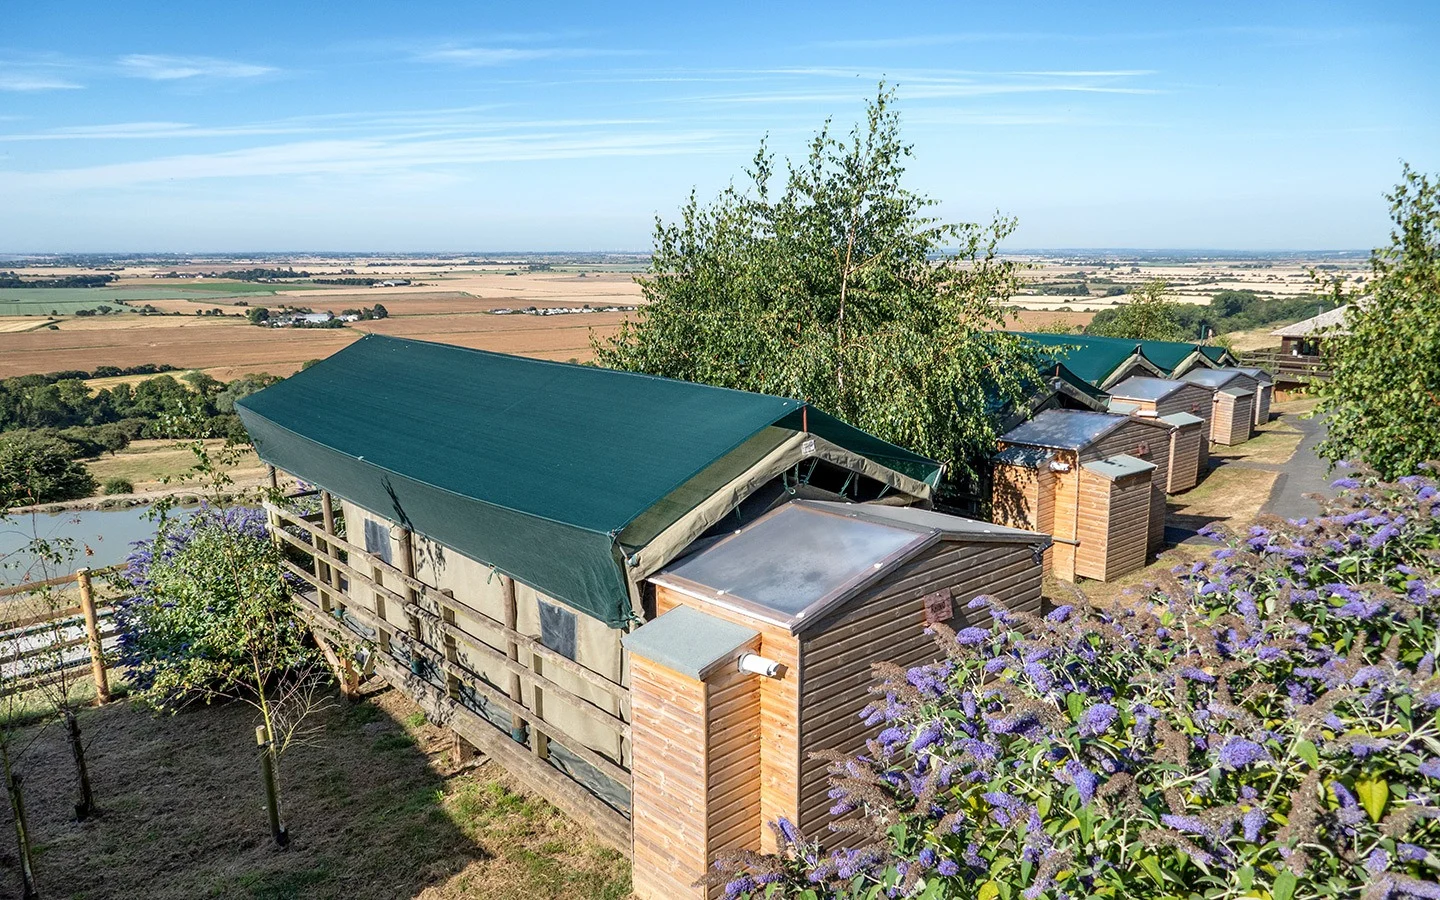 Giraffe Lodge tented camp at Port Lympne Reserve in Kent, England